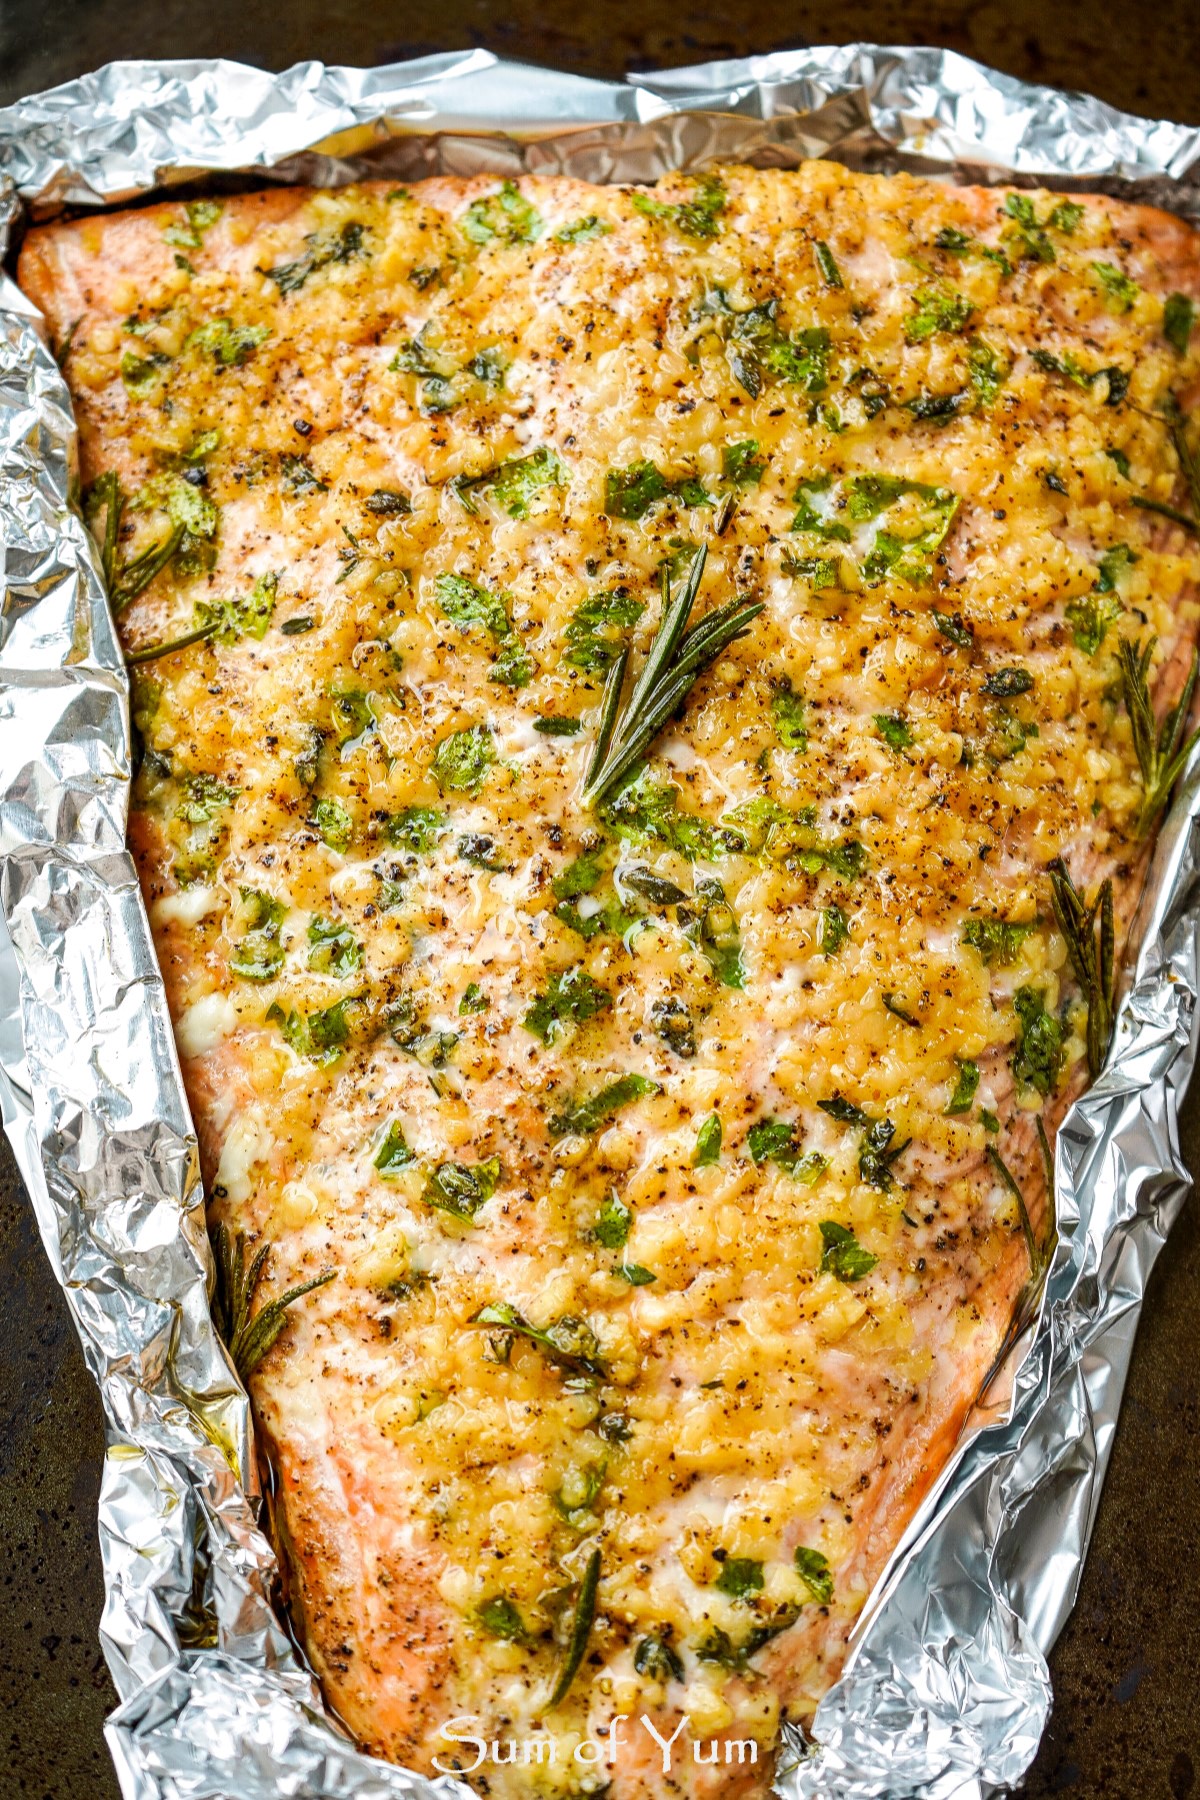 Baked Salmon with Garlic & Herbs